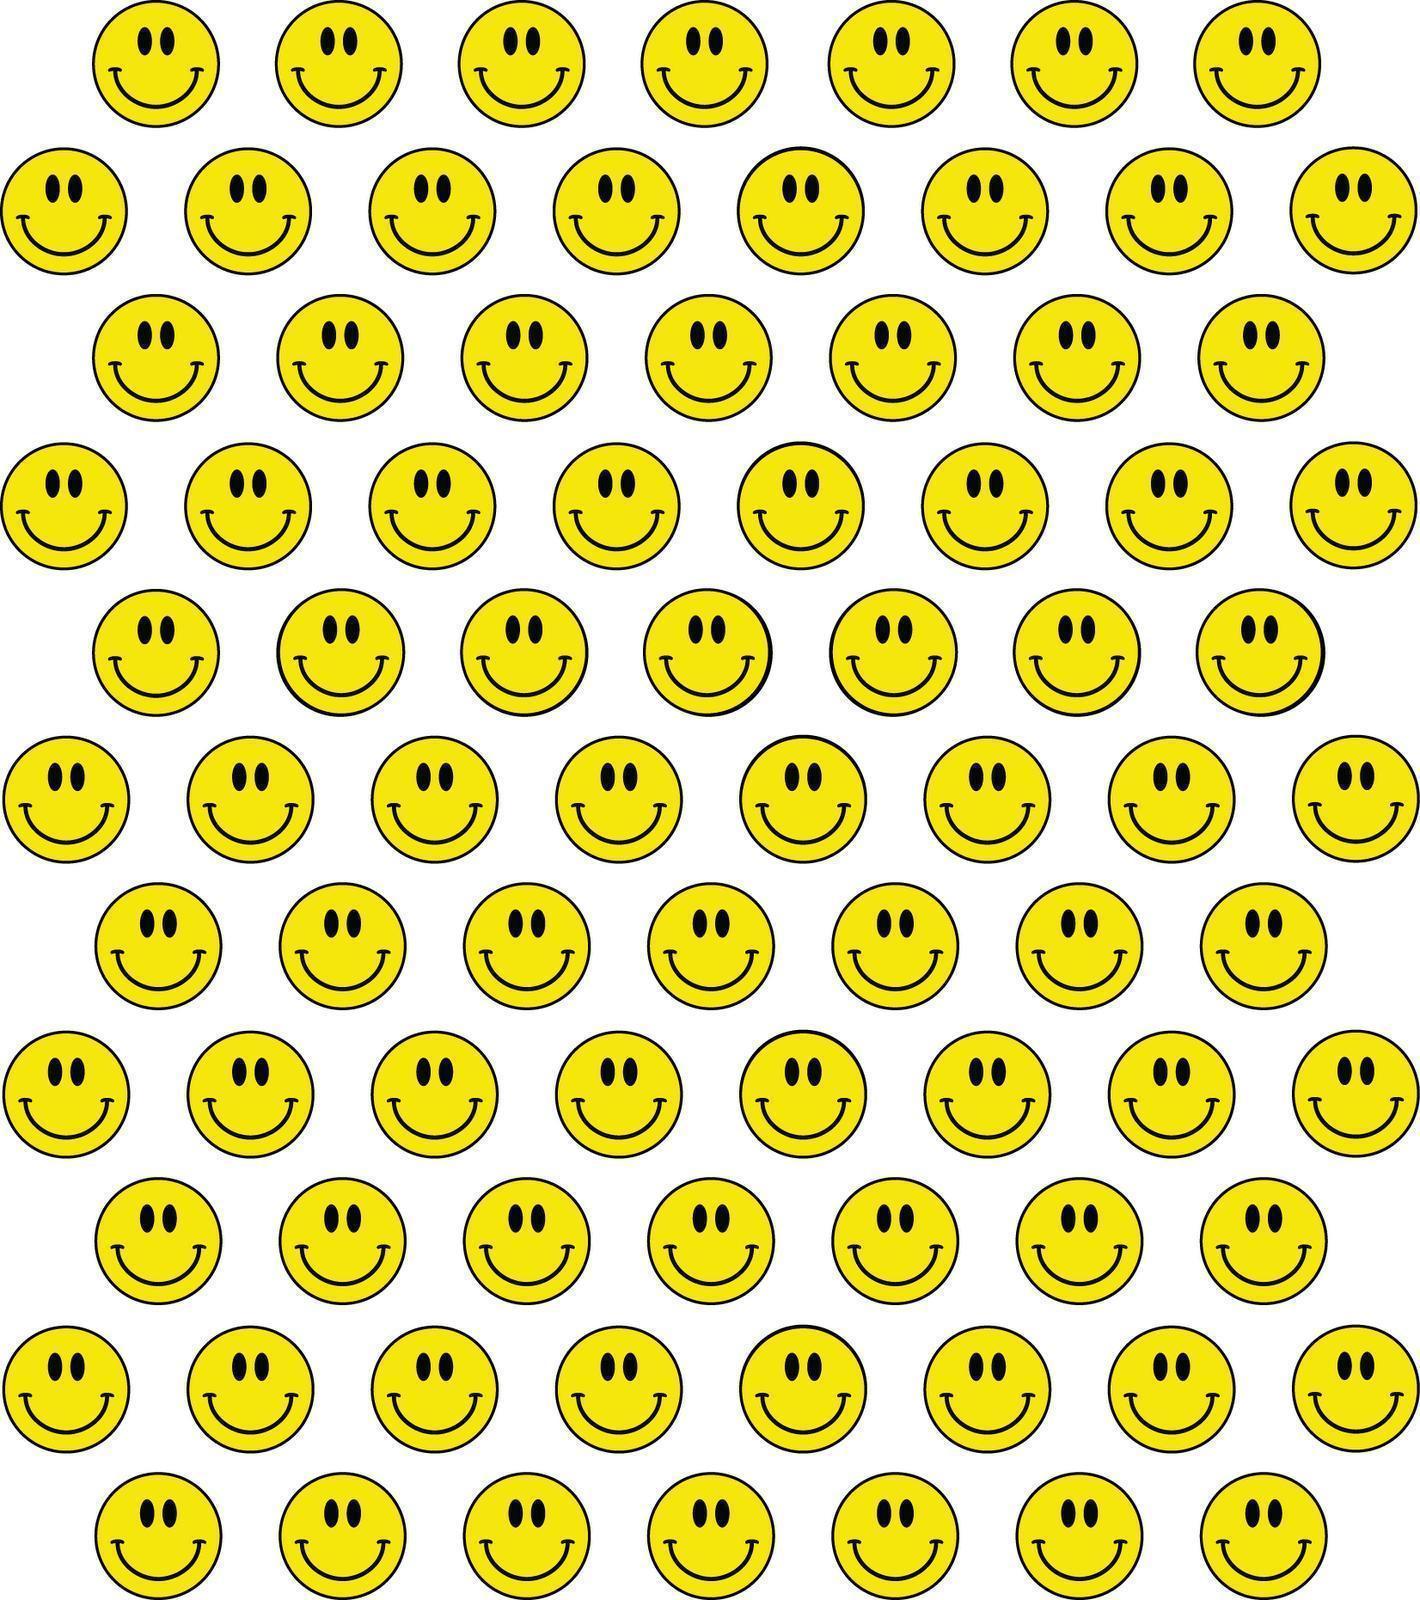 Wallpapers For > Animated Smiley Face Backgrounds